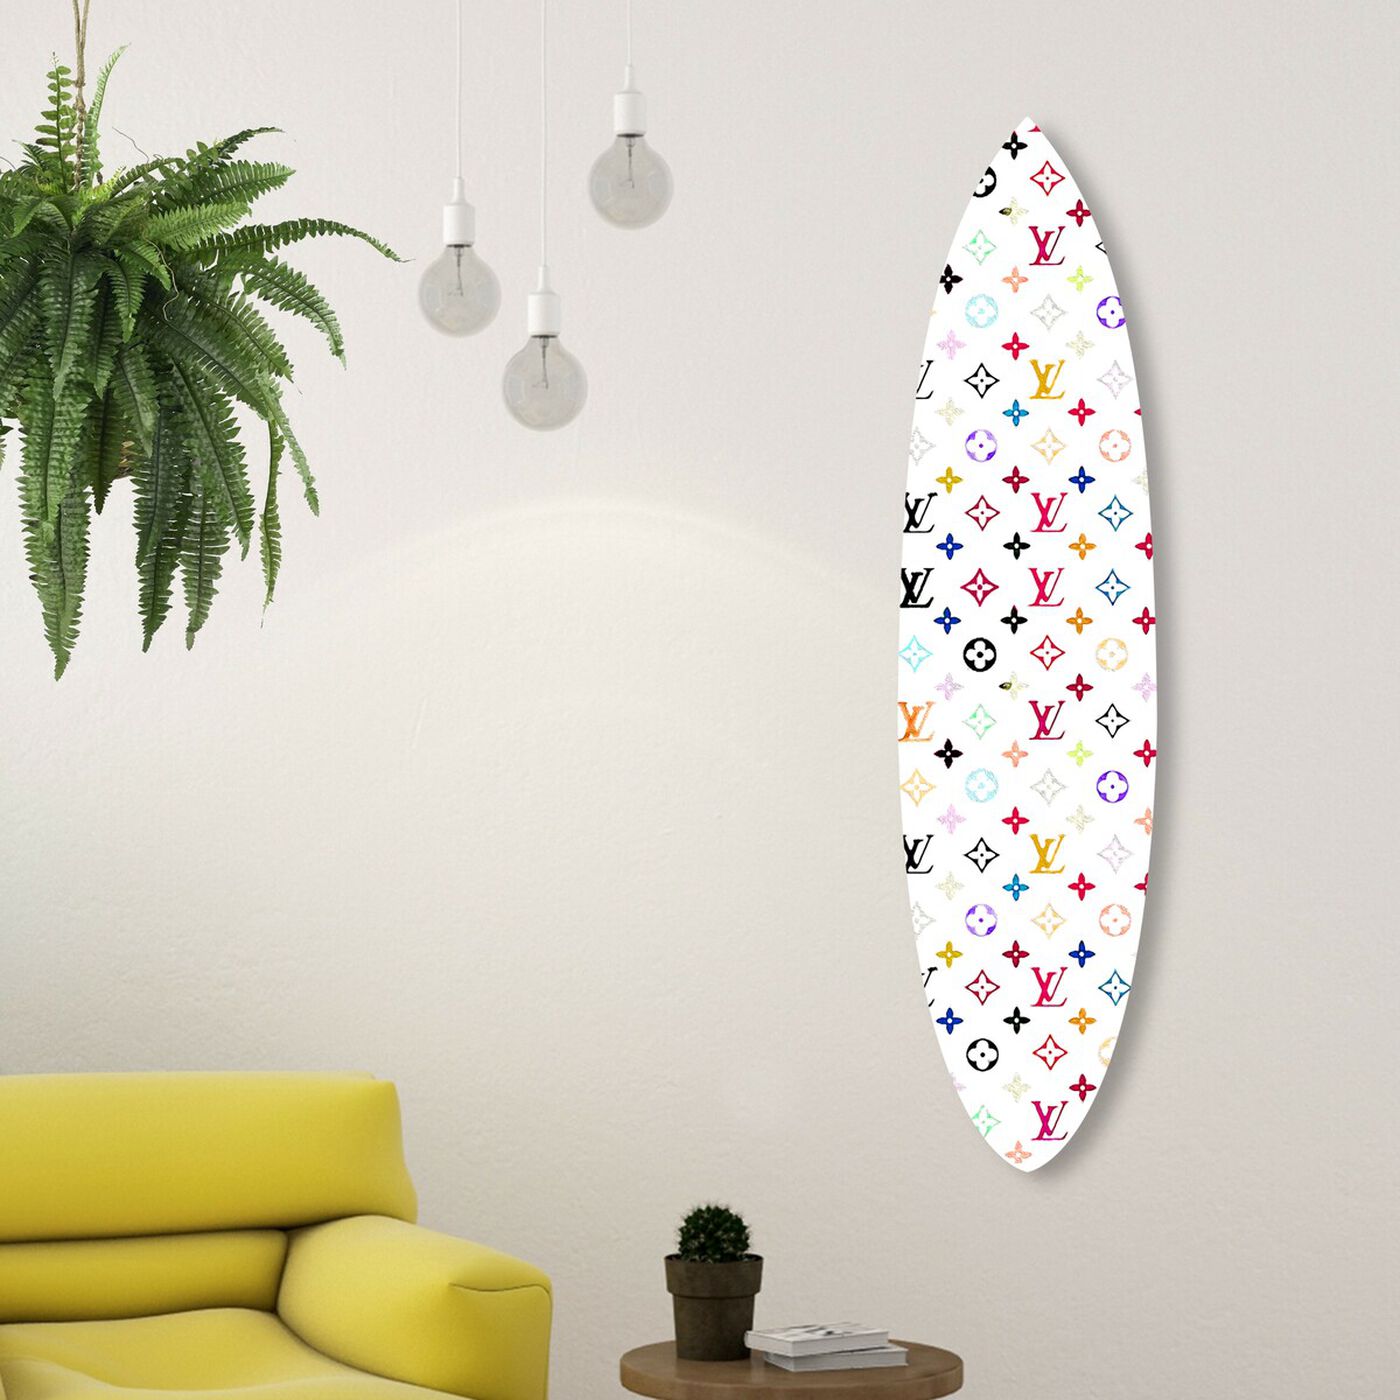 louis vuitton wall stickers